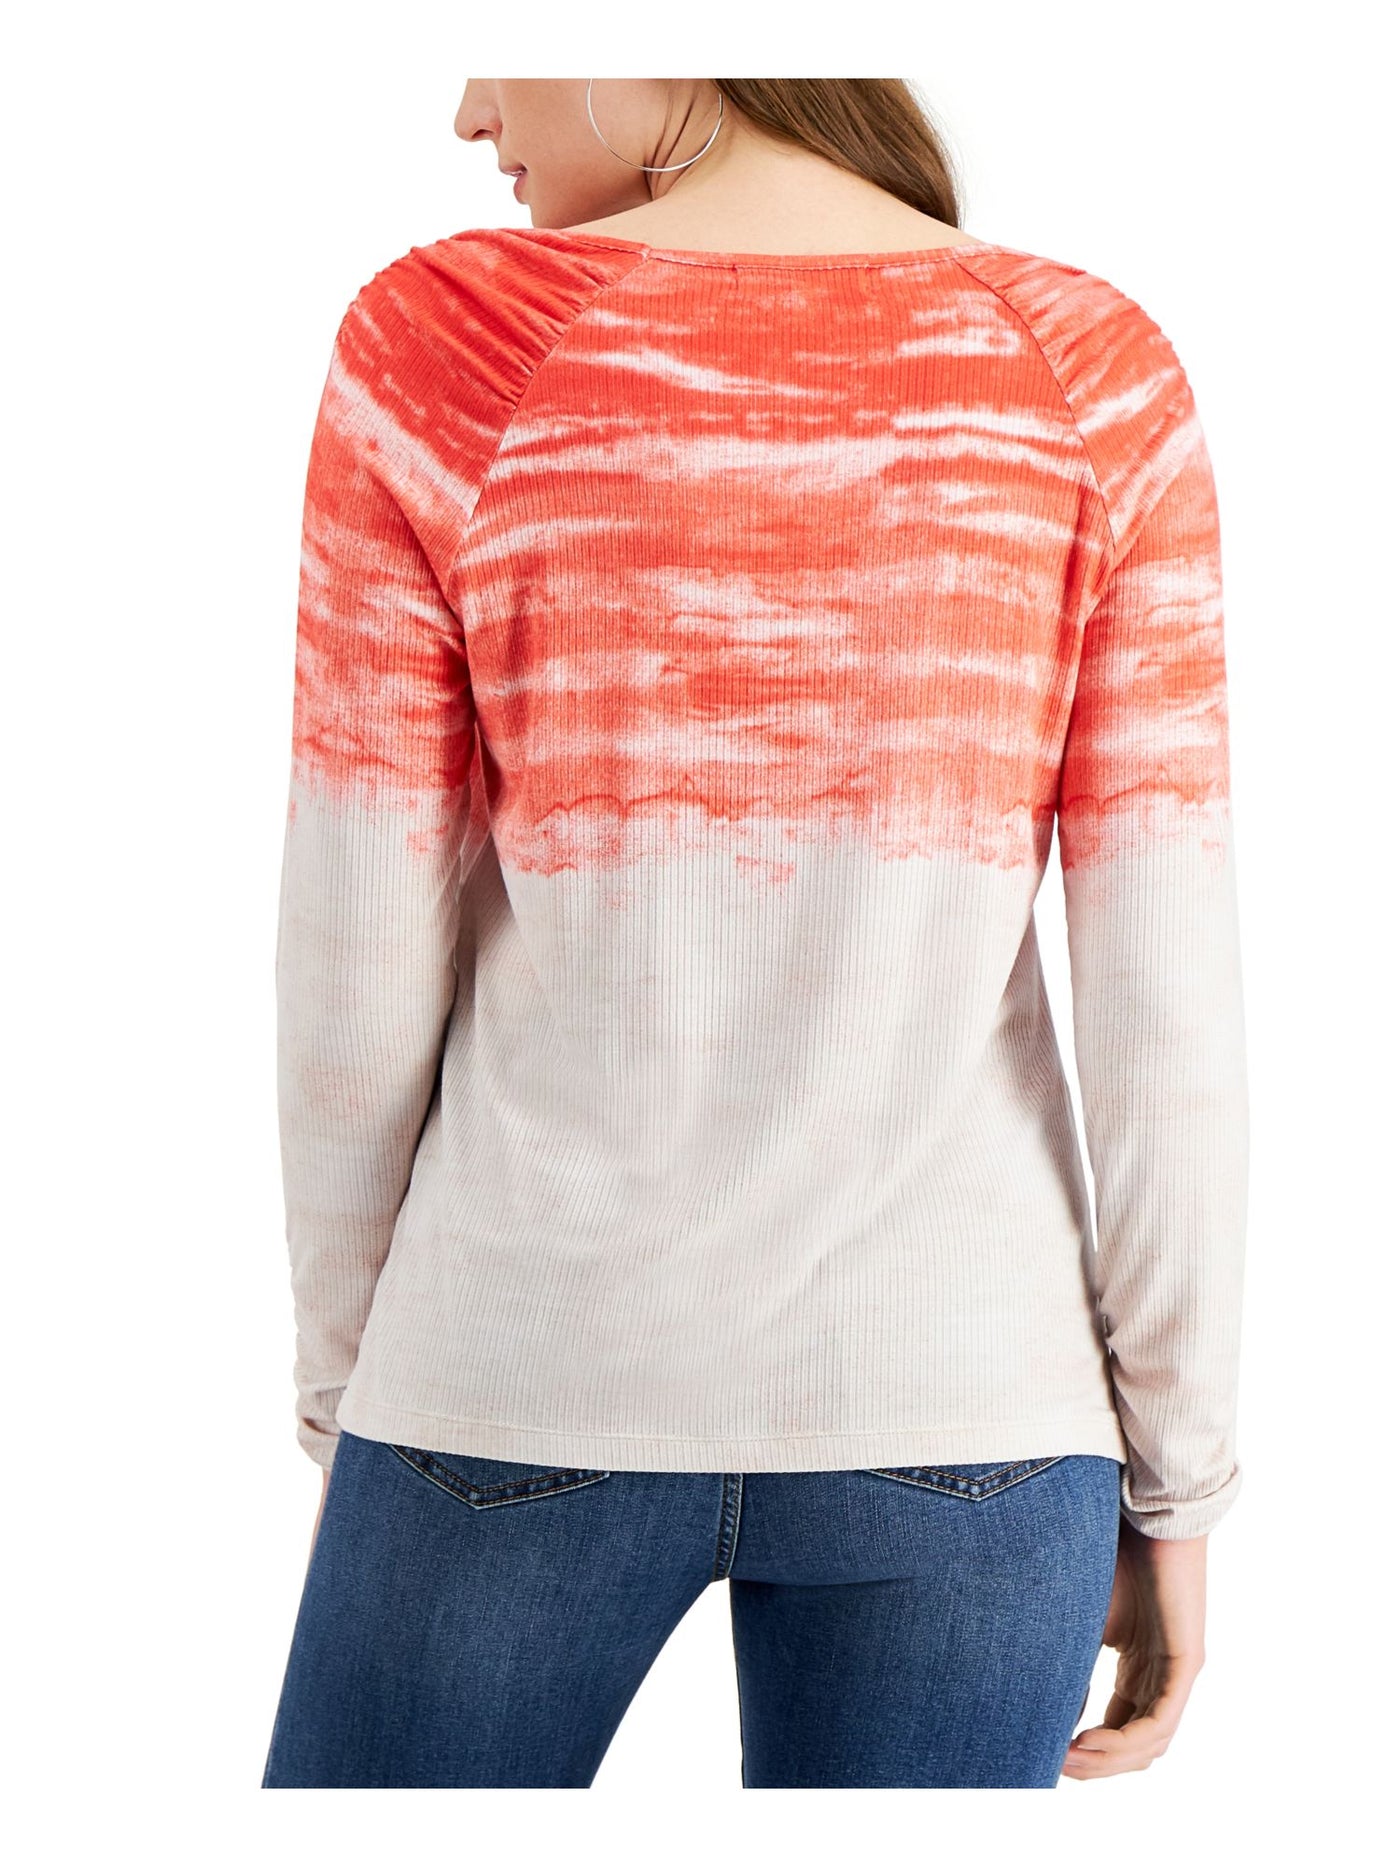 FEVER Womens Orange Ribbed Tie Dye Long Sleeve Square Neck Top M